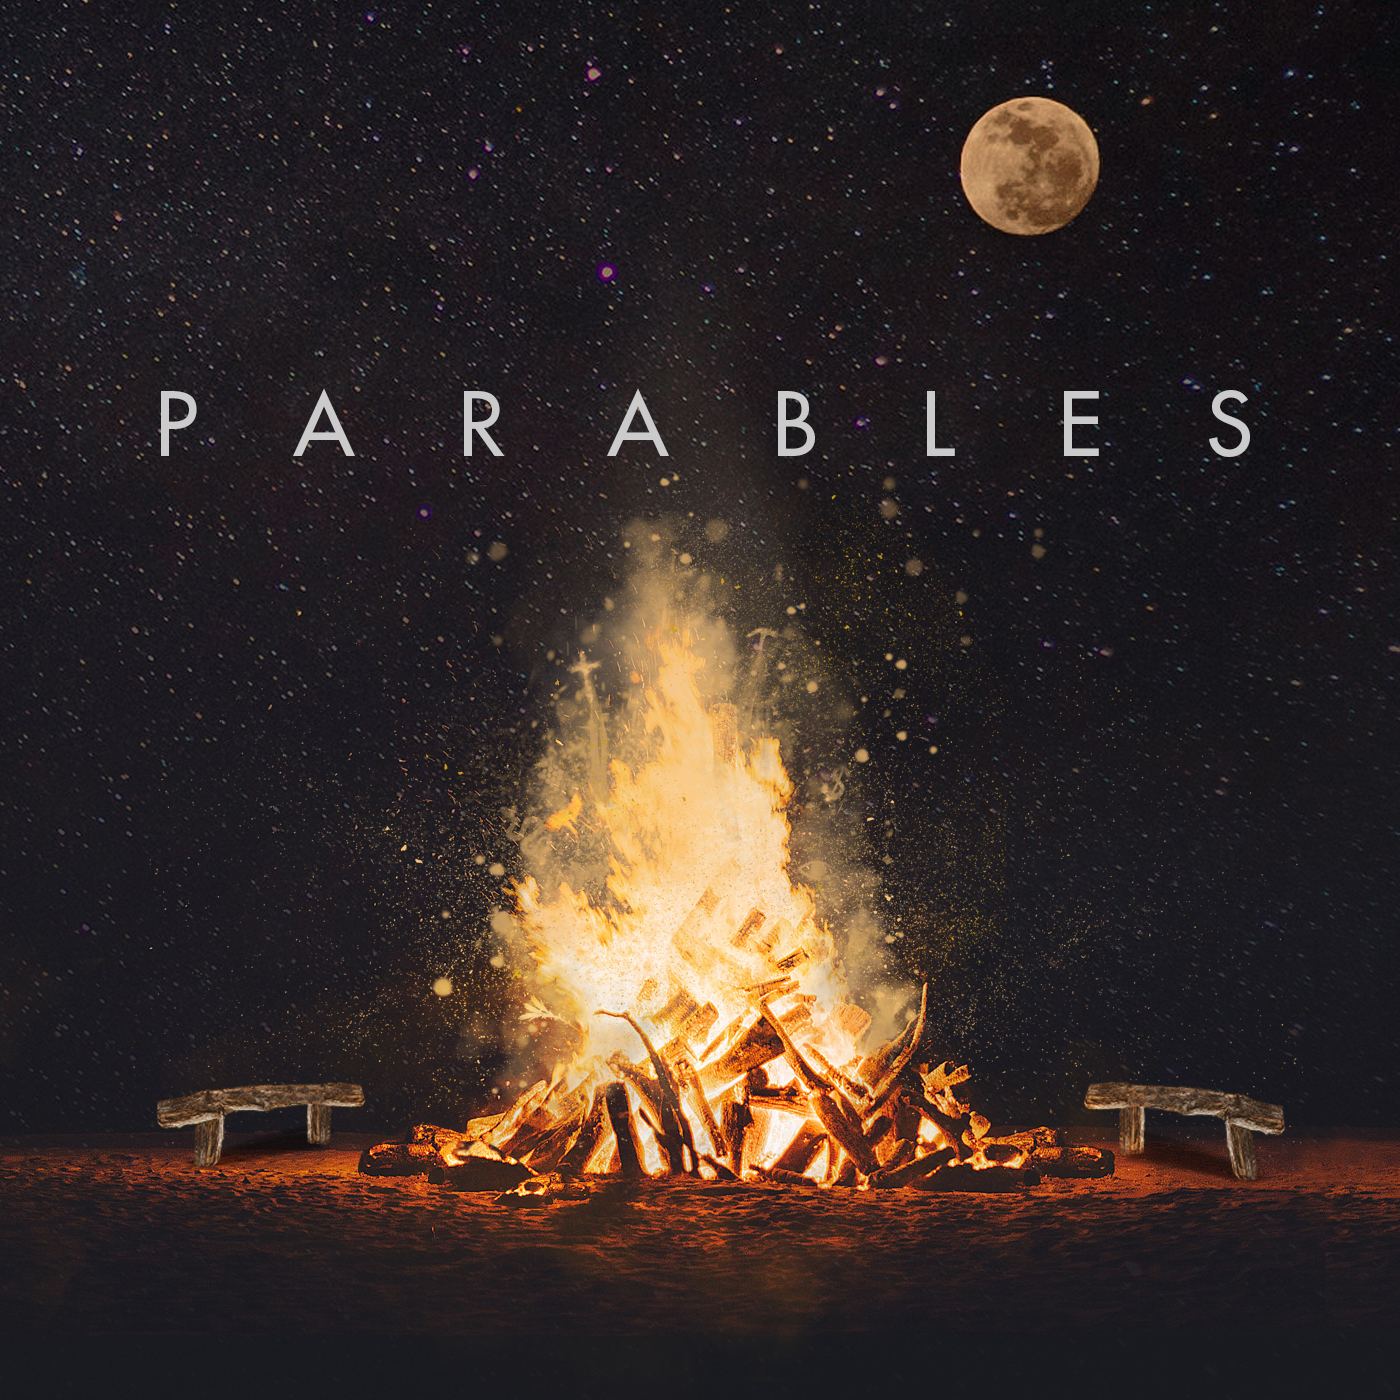 Parables - Forgiven Much - Chris Wall - 11-3-2019